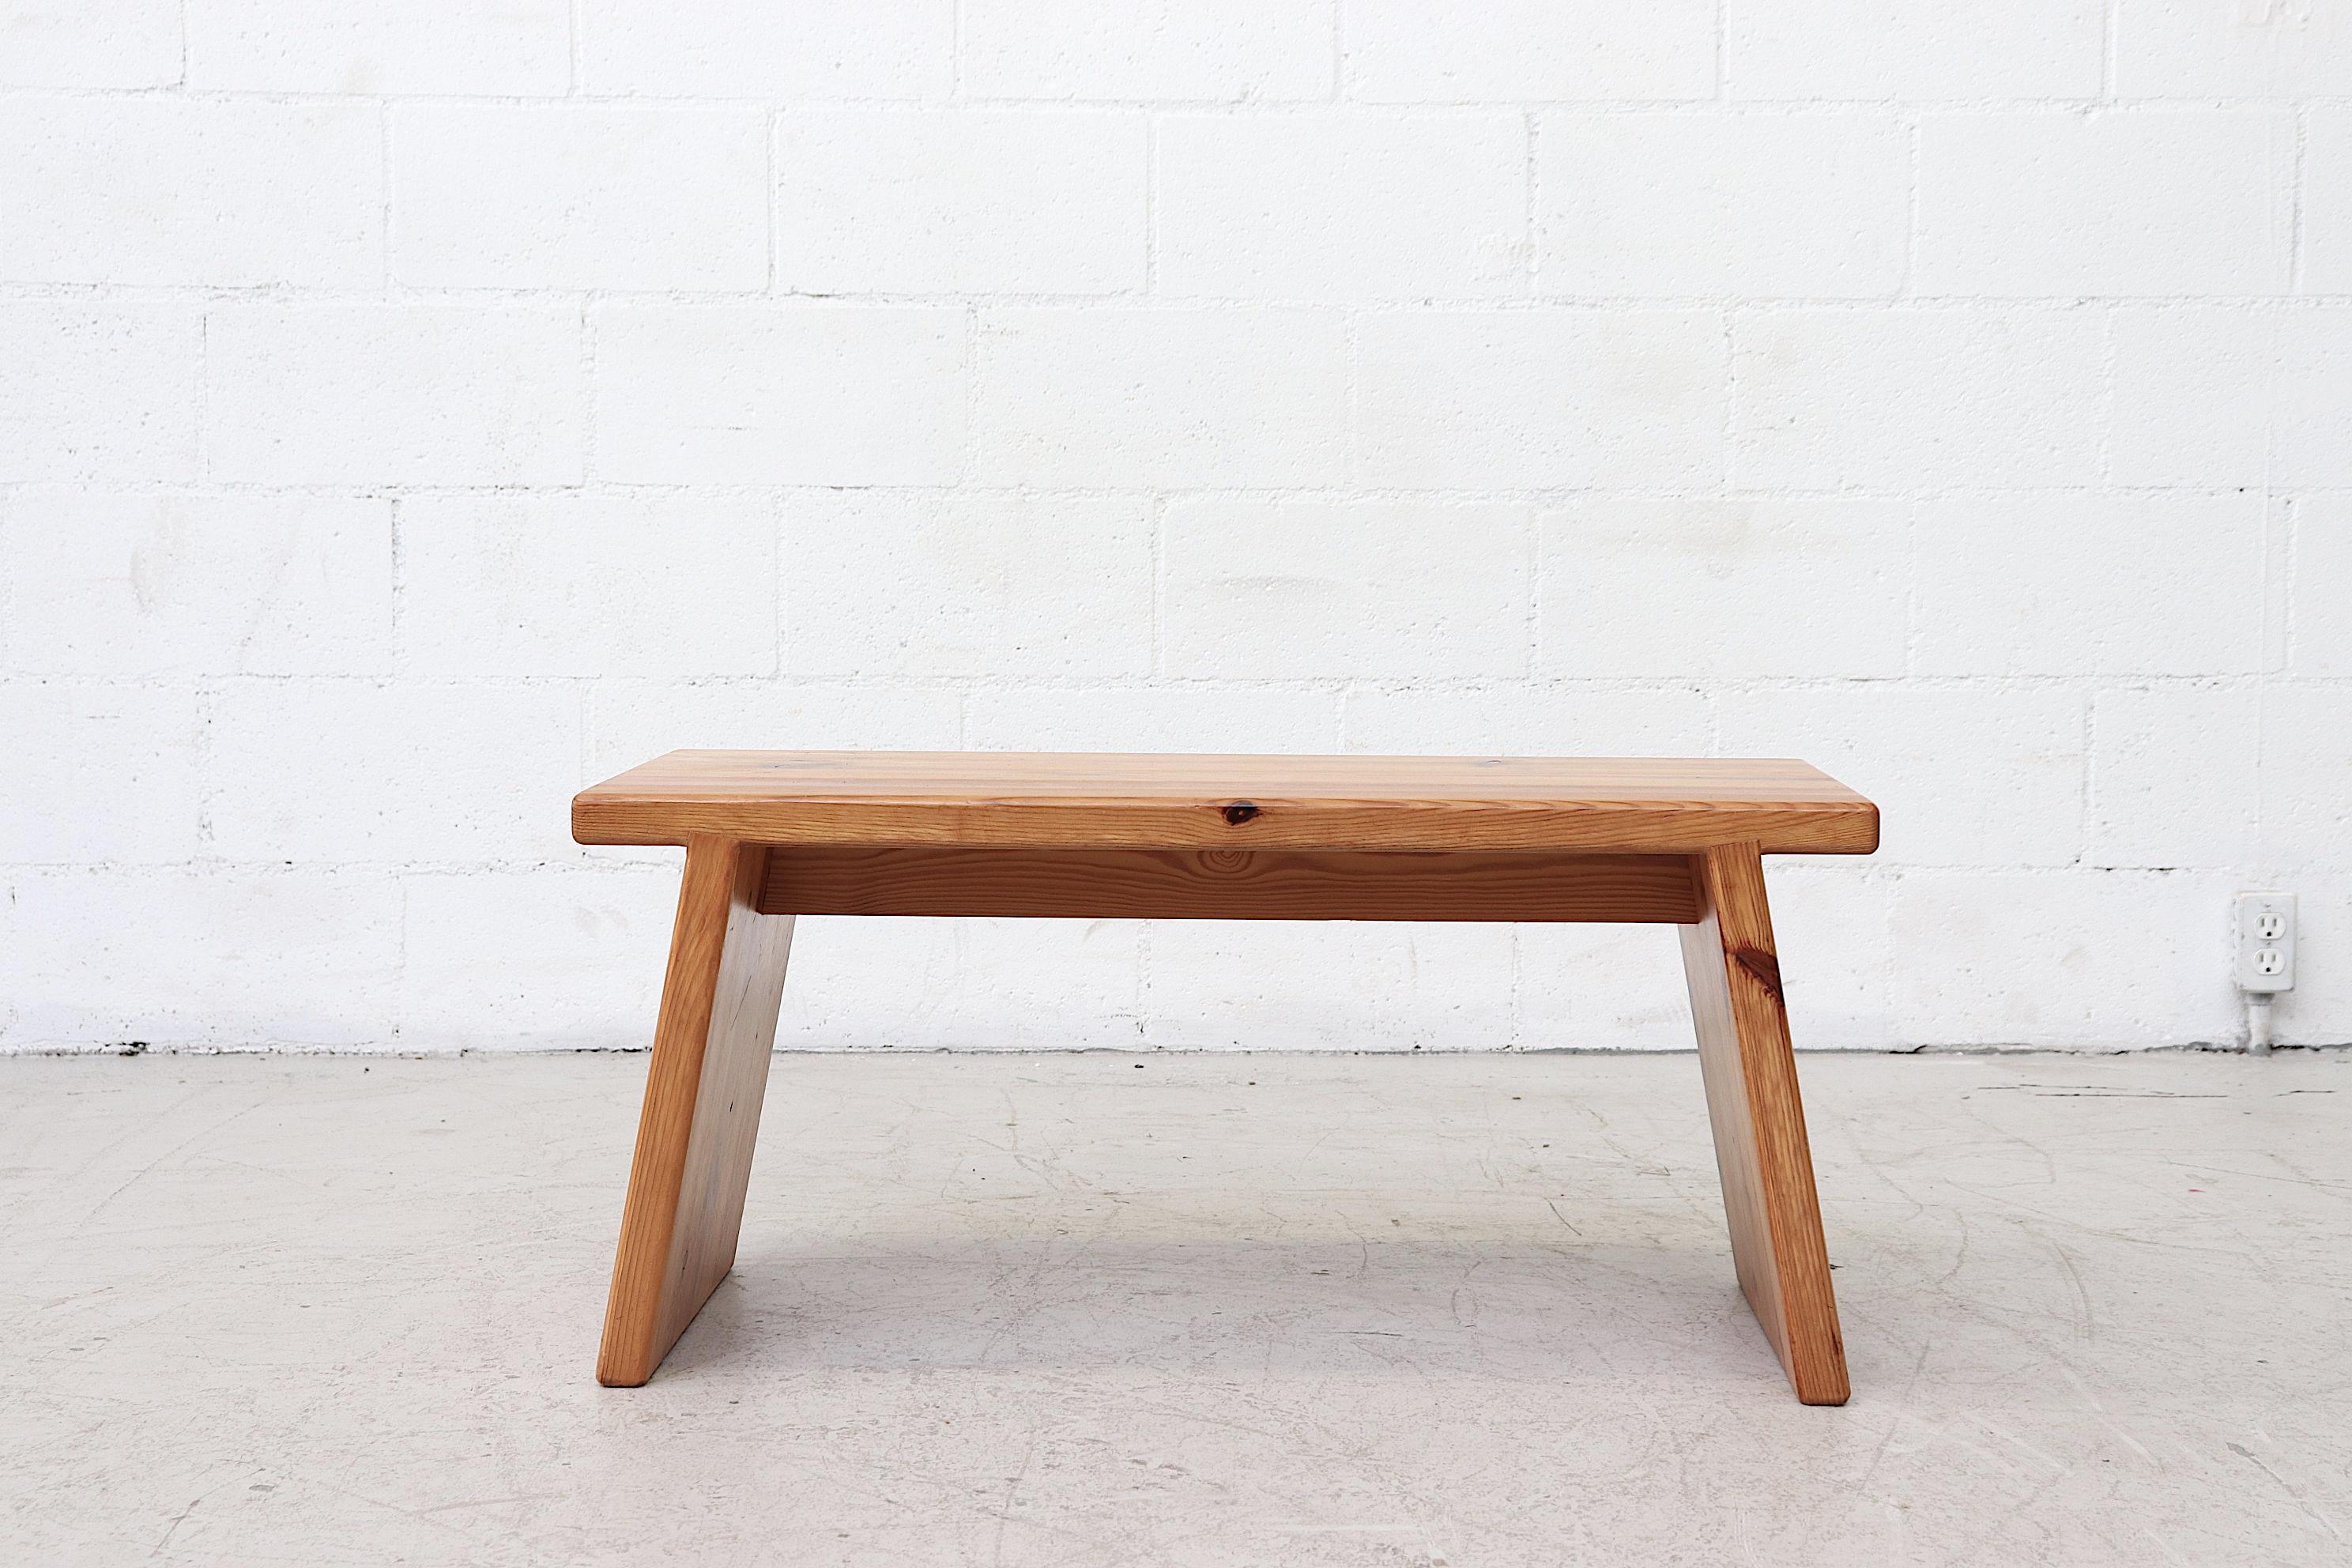 Small Ate Van Apeldoorn natural pine coffee or side table with angled pine legs. Zen-Like design. In original condition with wear consistent with its age and usage. Other similar tables available.